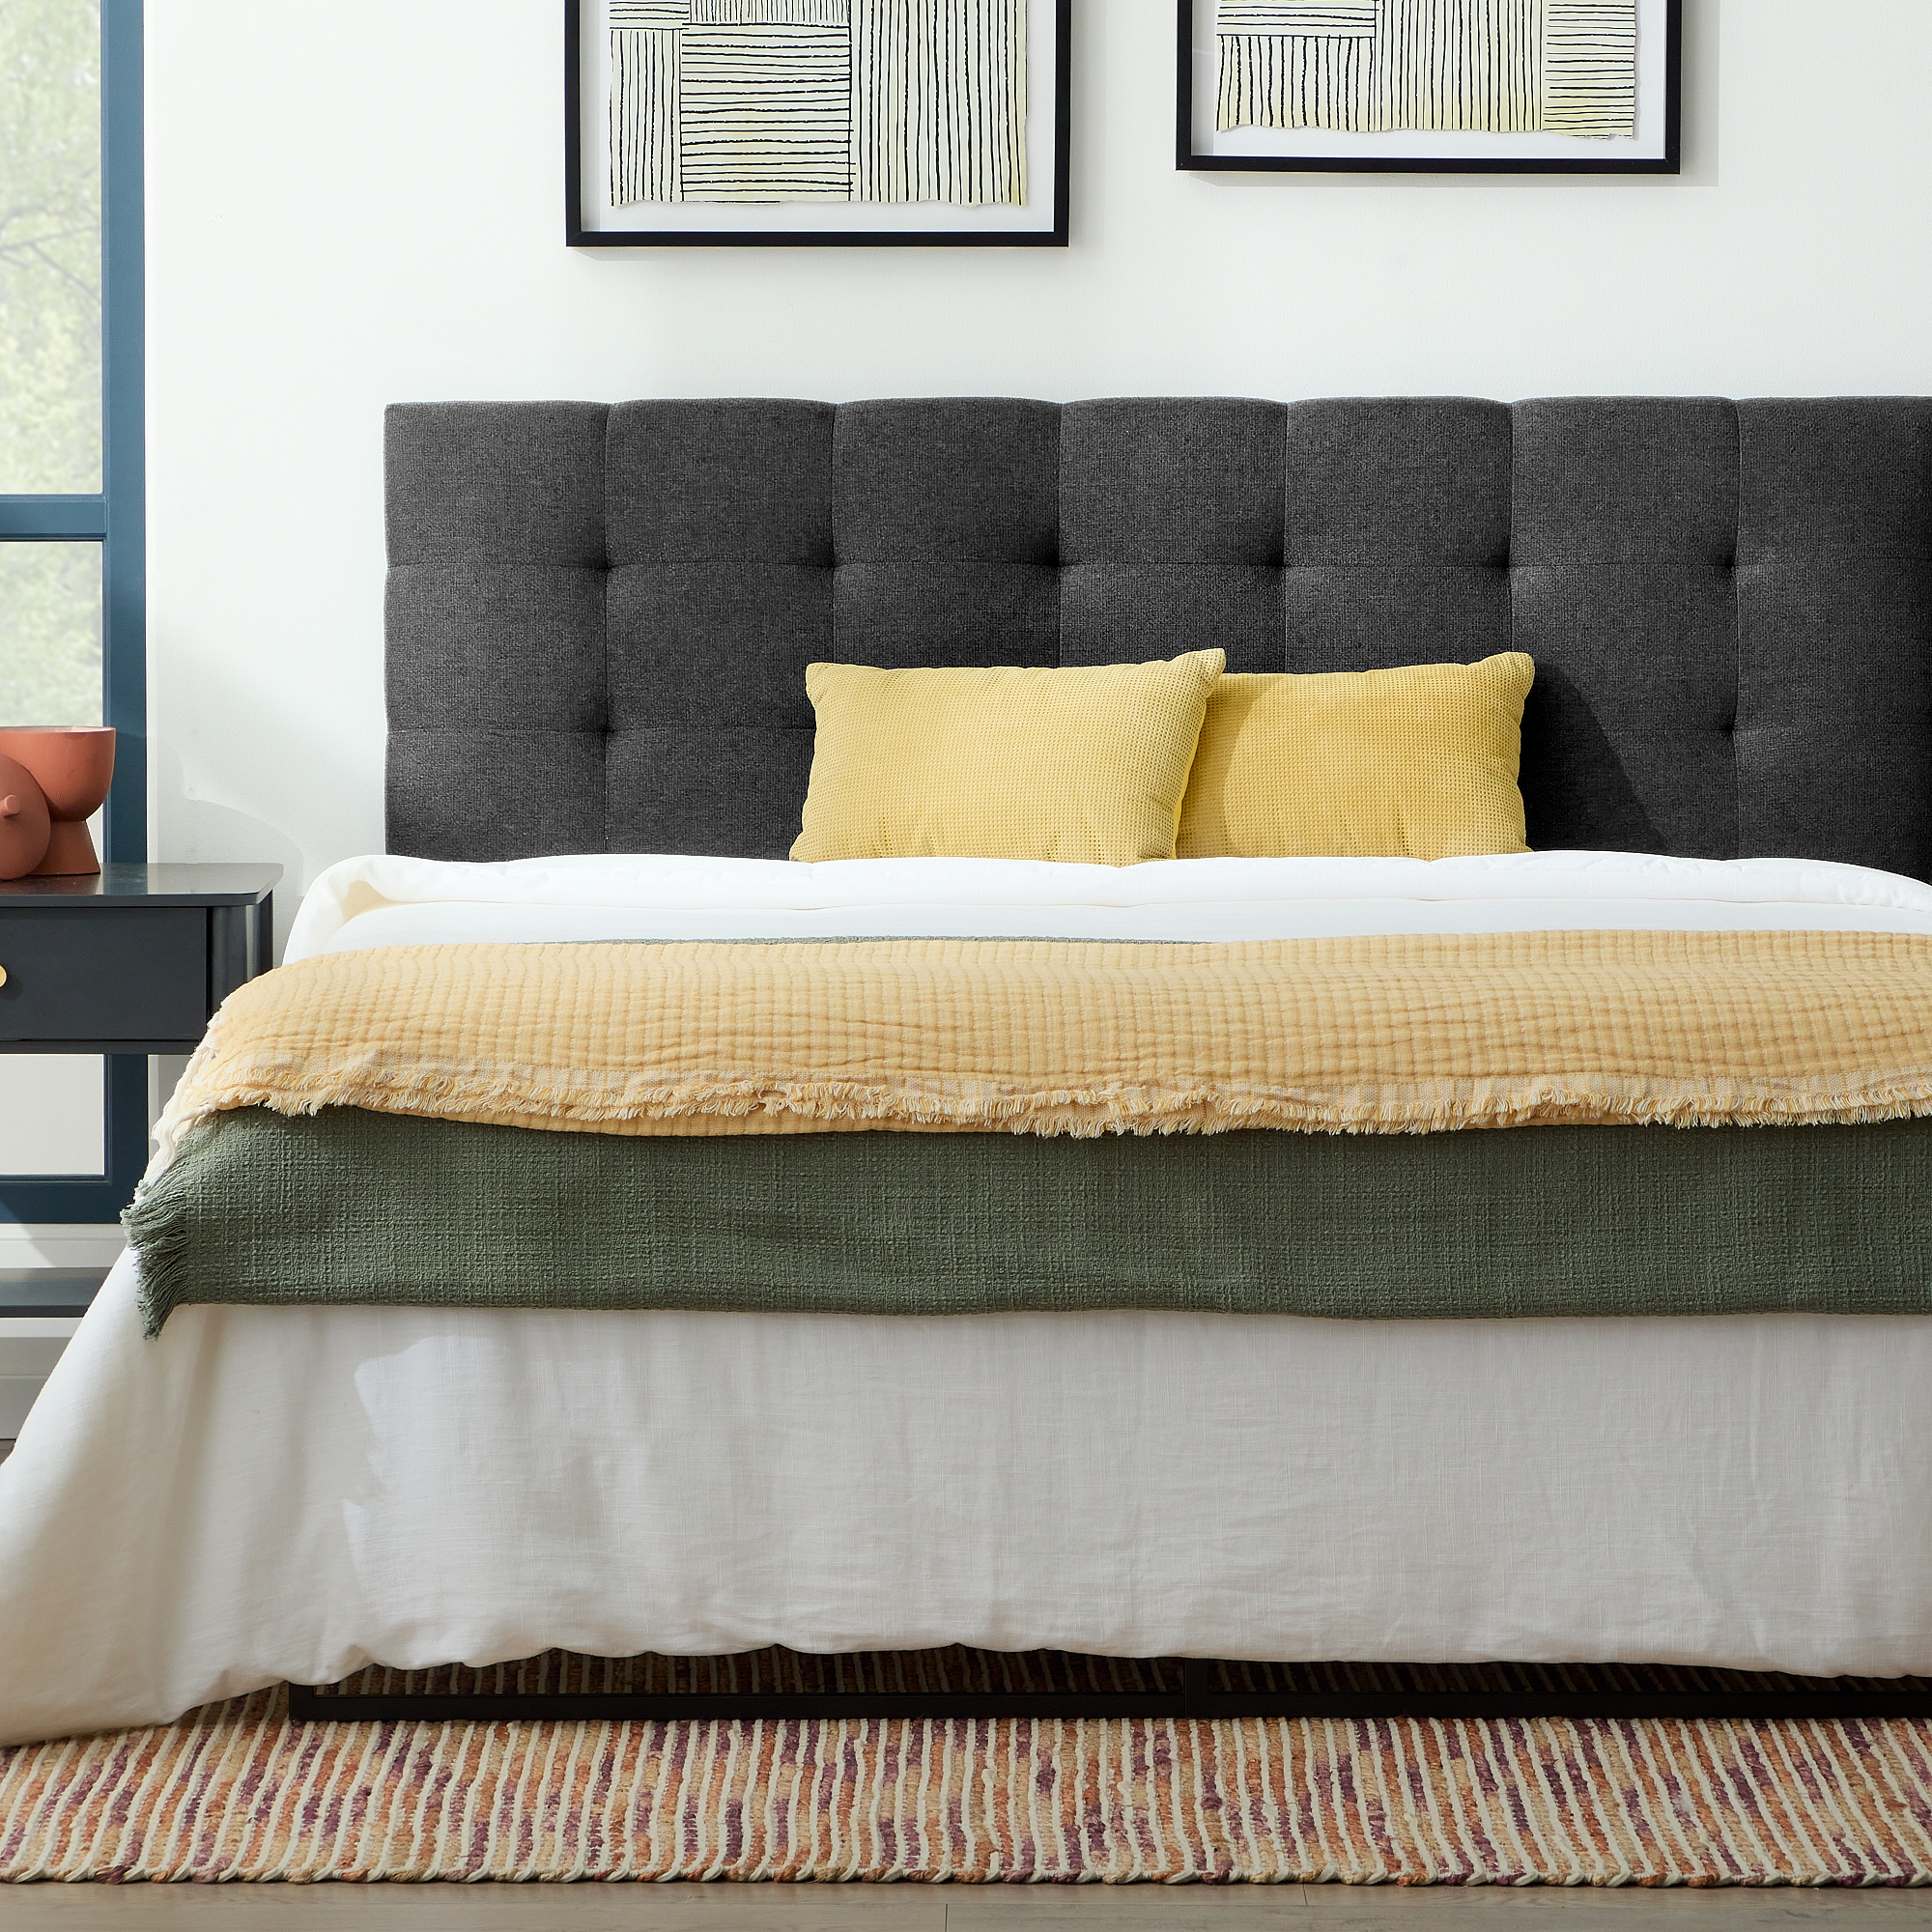 Rest Haven Eugene Square Tufted Upholstered Headboard, Twin/Twin XL, Charcoal - image 1 of 10